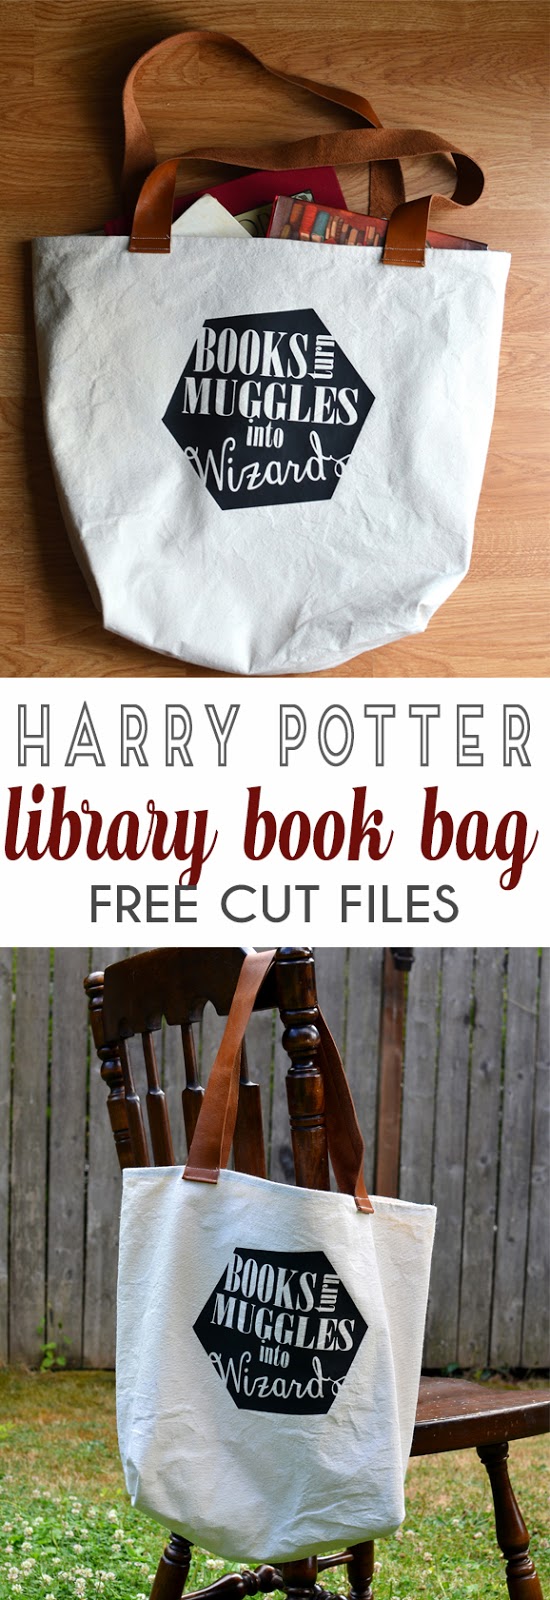 Harry Potter Bag for library book bag sewing tutorial and free cut files for cricut and silhouette